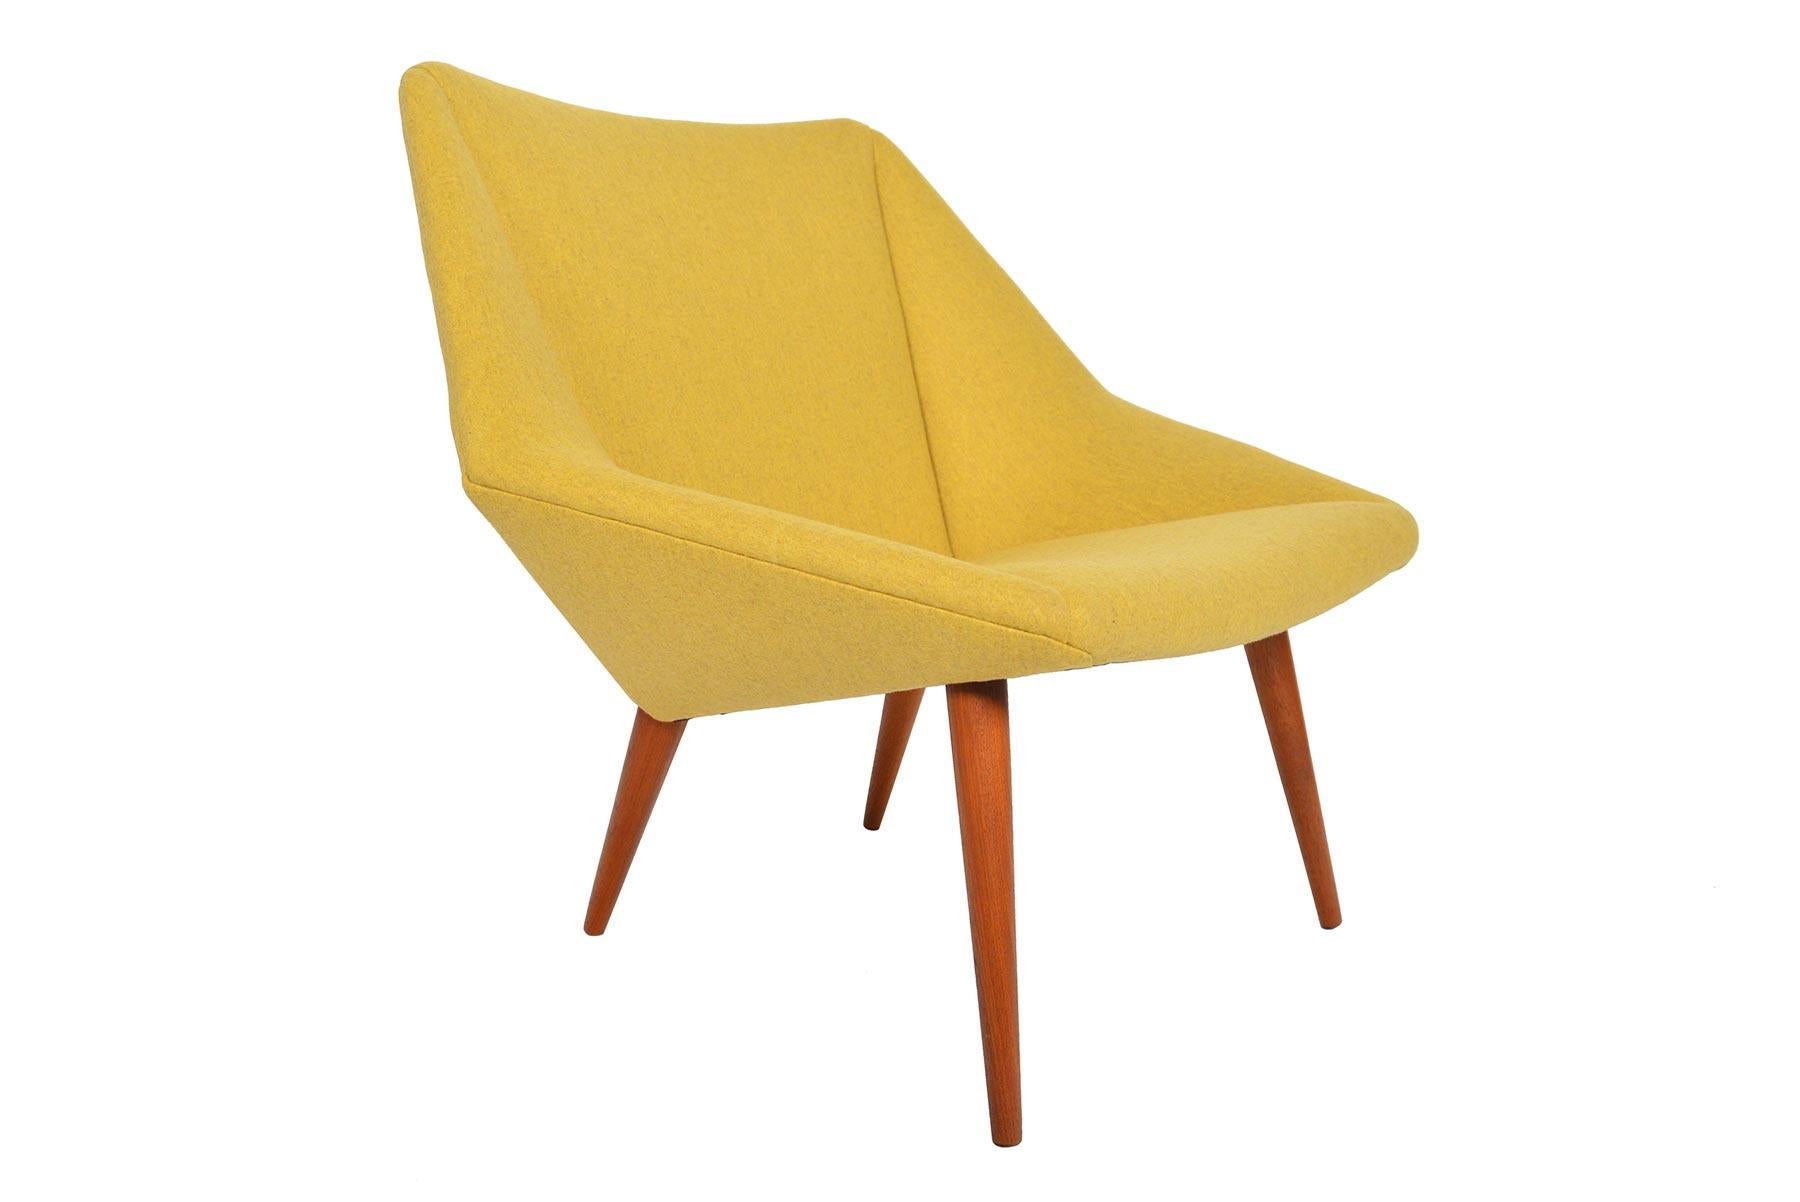 This jewel-cut lounge chair was designed by Nanna Ditzel for Søren Willadsen Møbelfabrik in 1955 as the ‘Tux’ chair Model 93. This vintage low back version has been upholstered in goldenrod Jefferson wool by Kravet. Chair stands on teak spindle